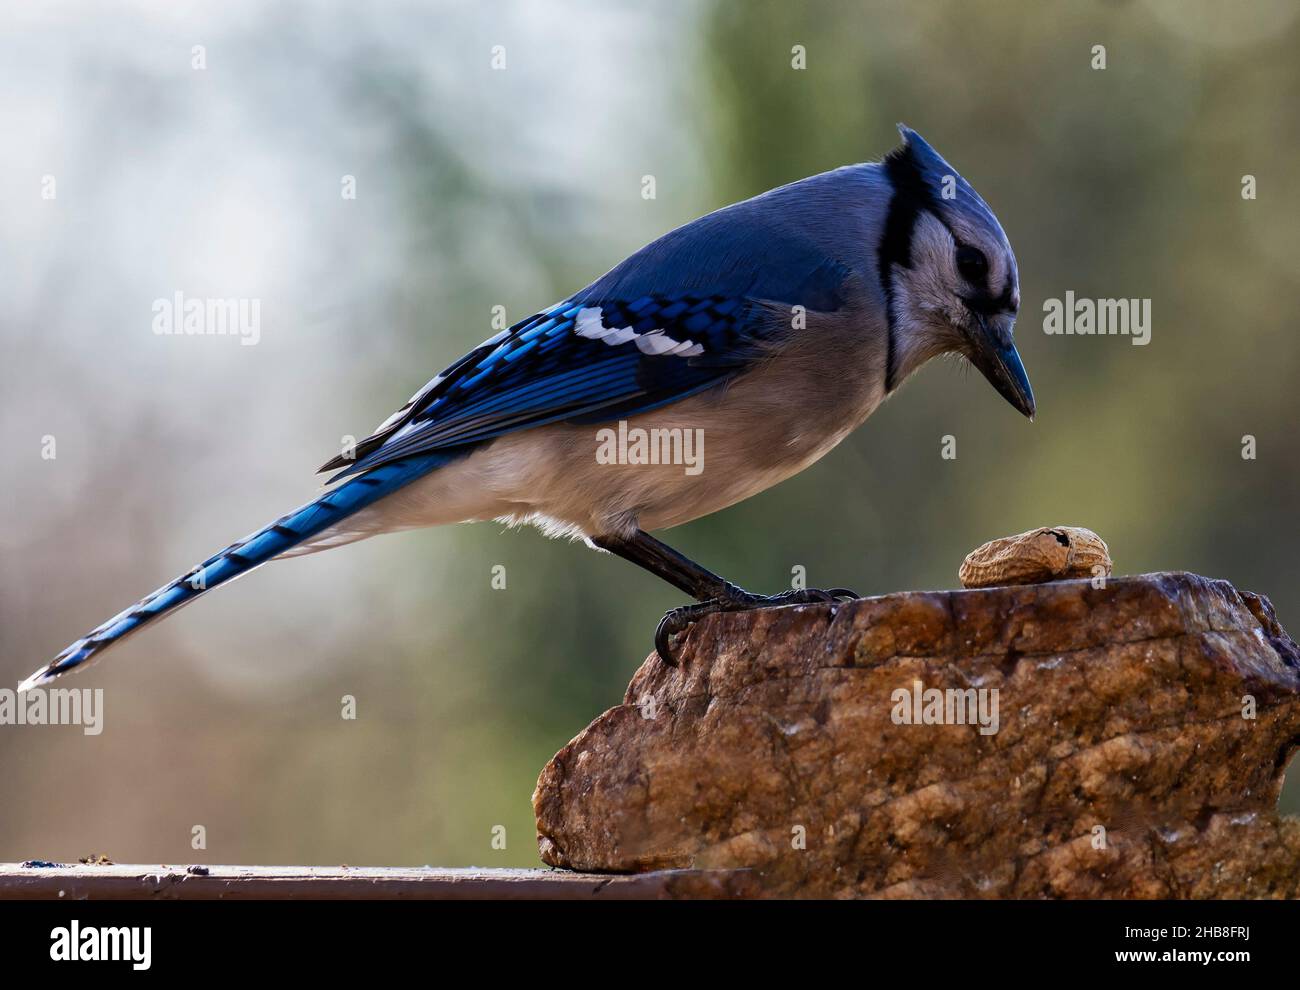 Bluejay lands on a rock looking for peanuts Stock Photo